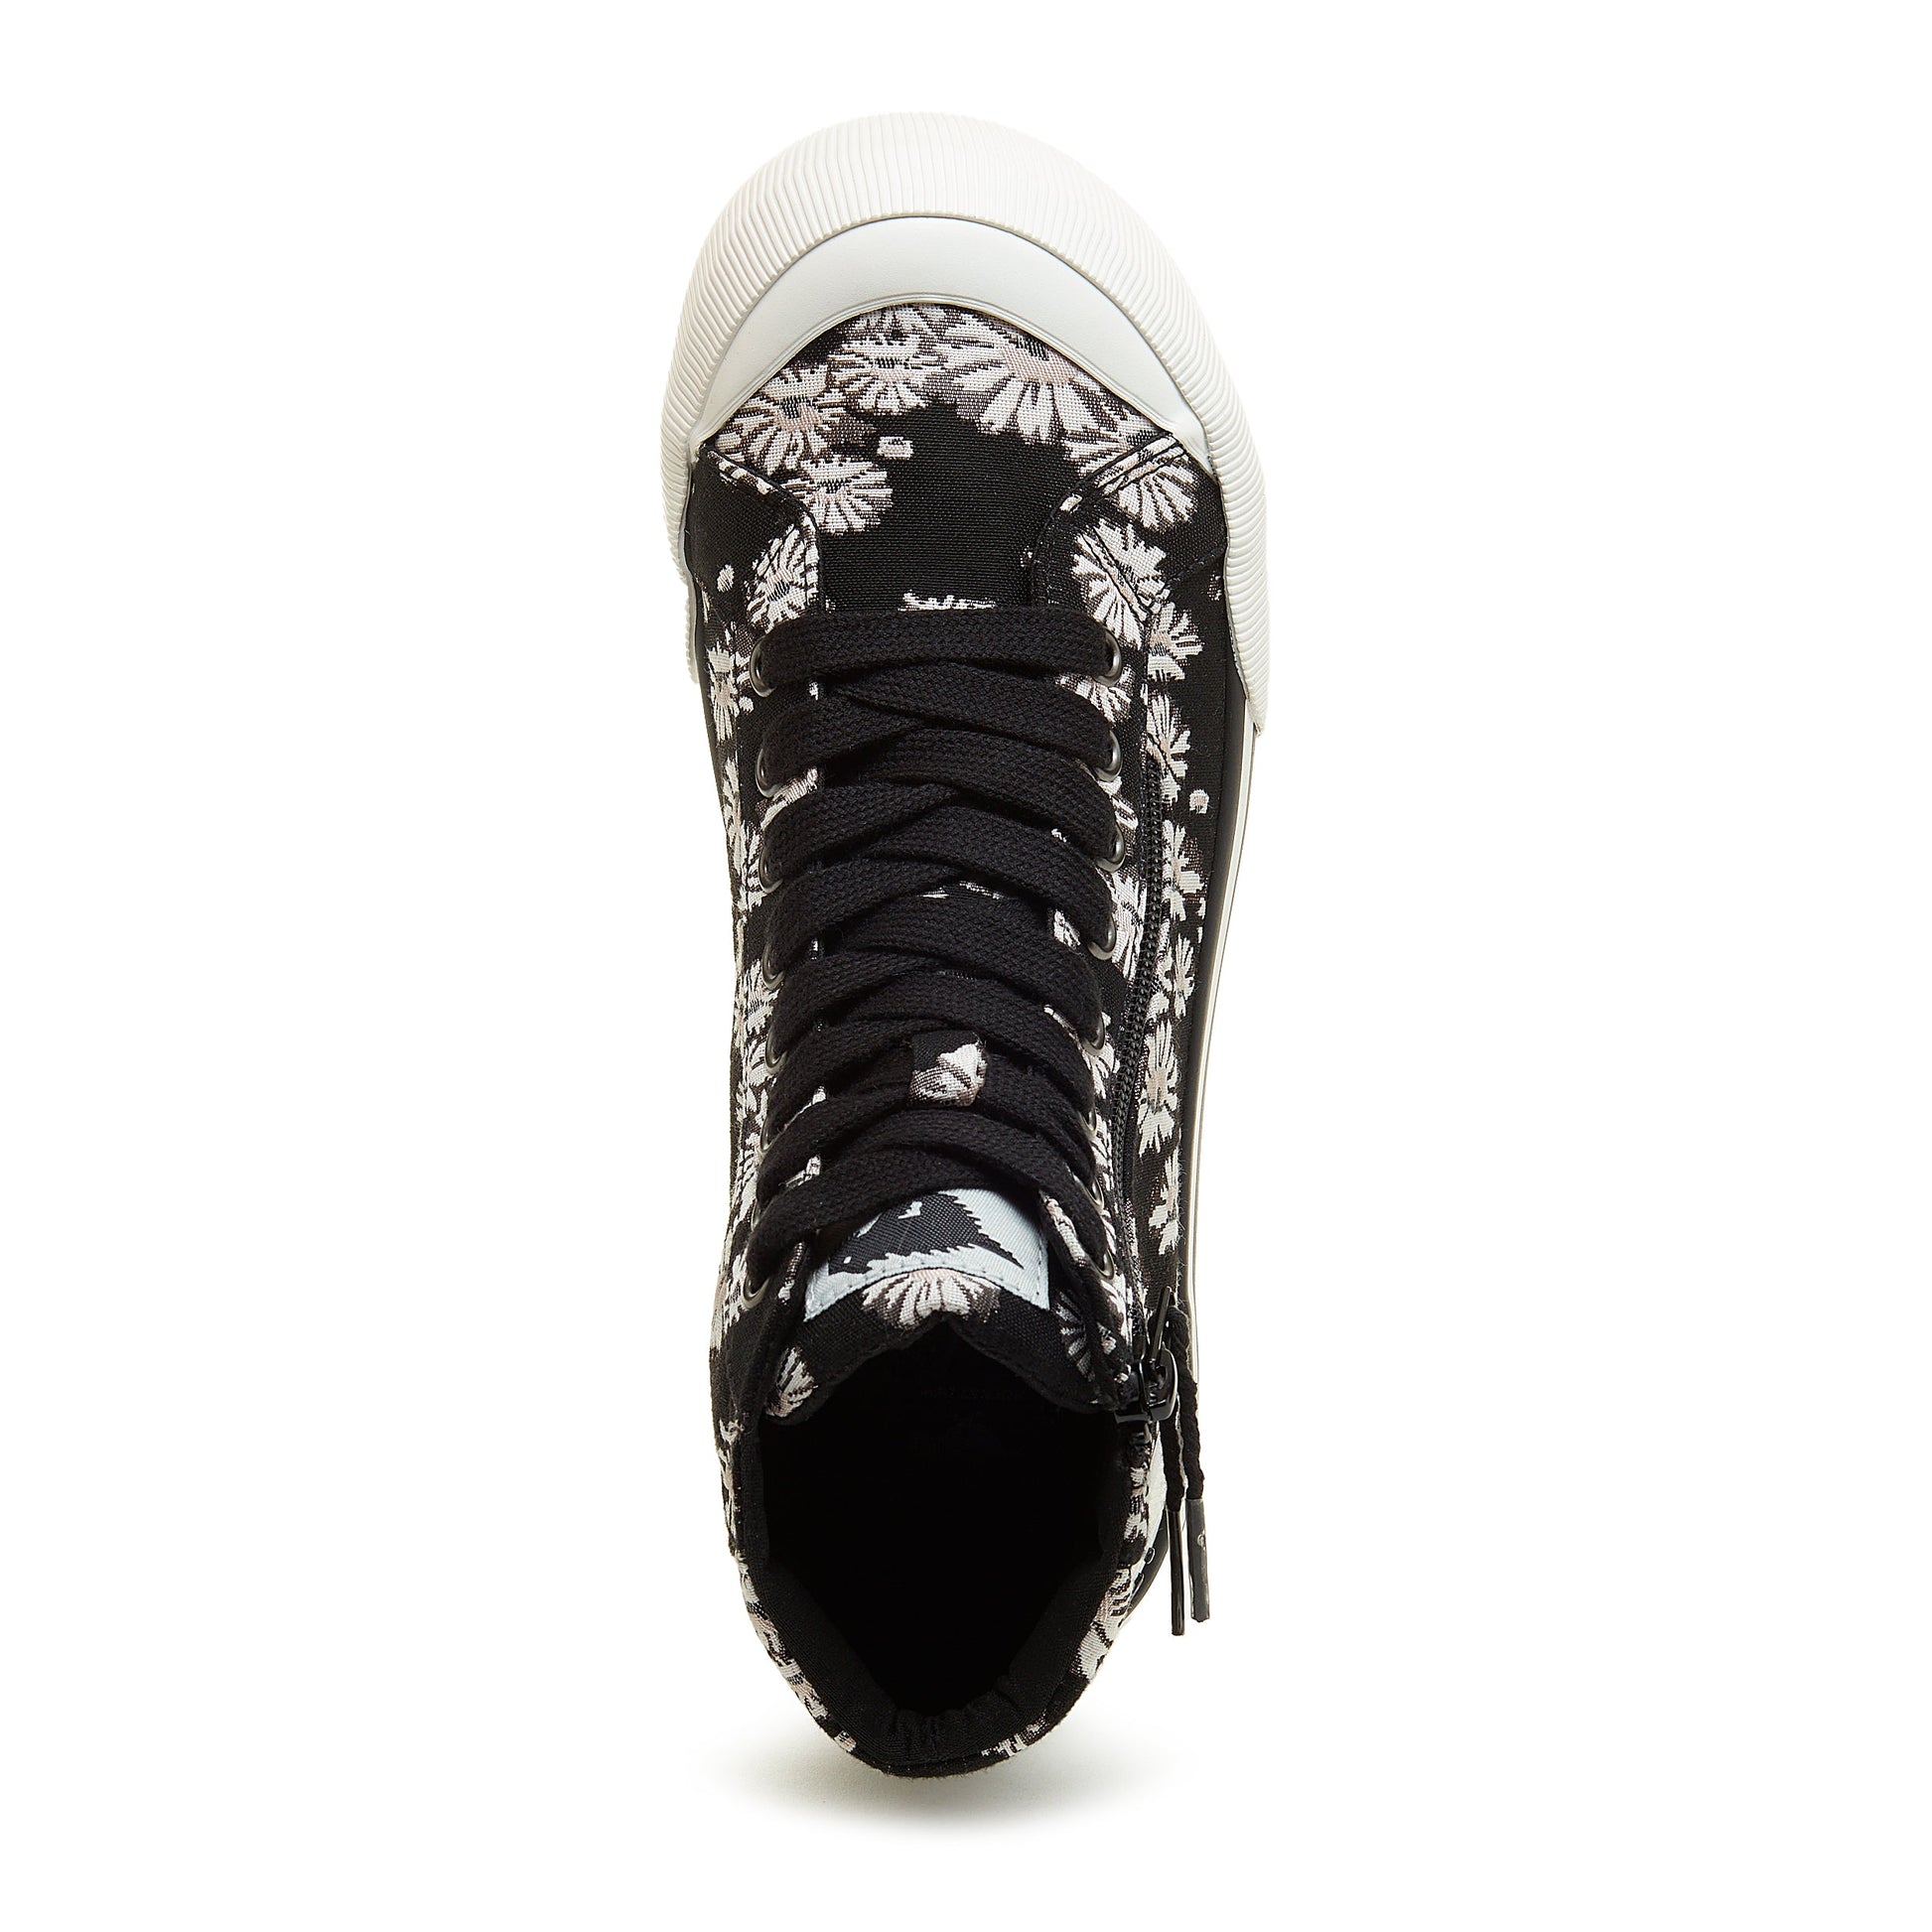 Jazzin Black Floral High Top Trainers